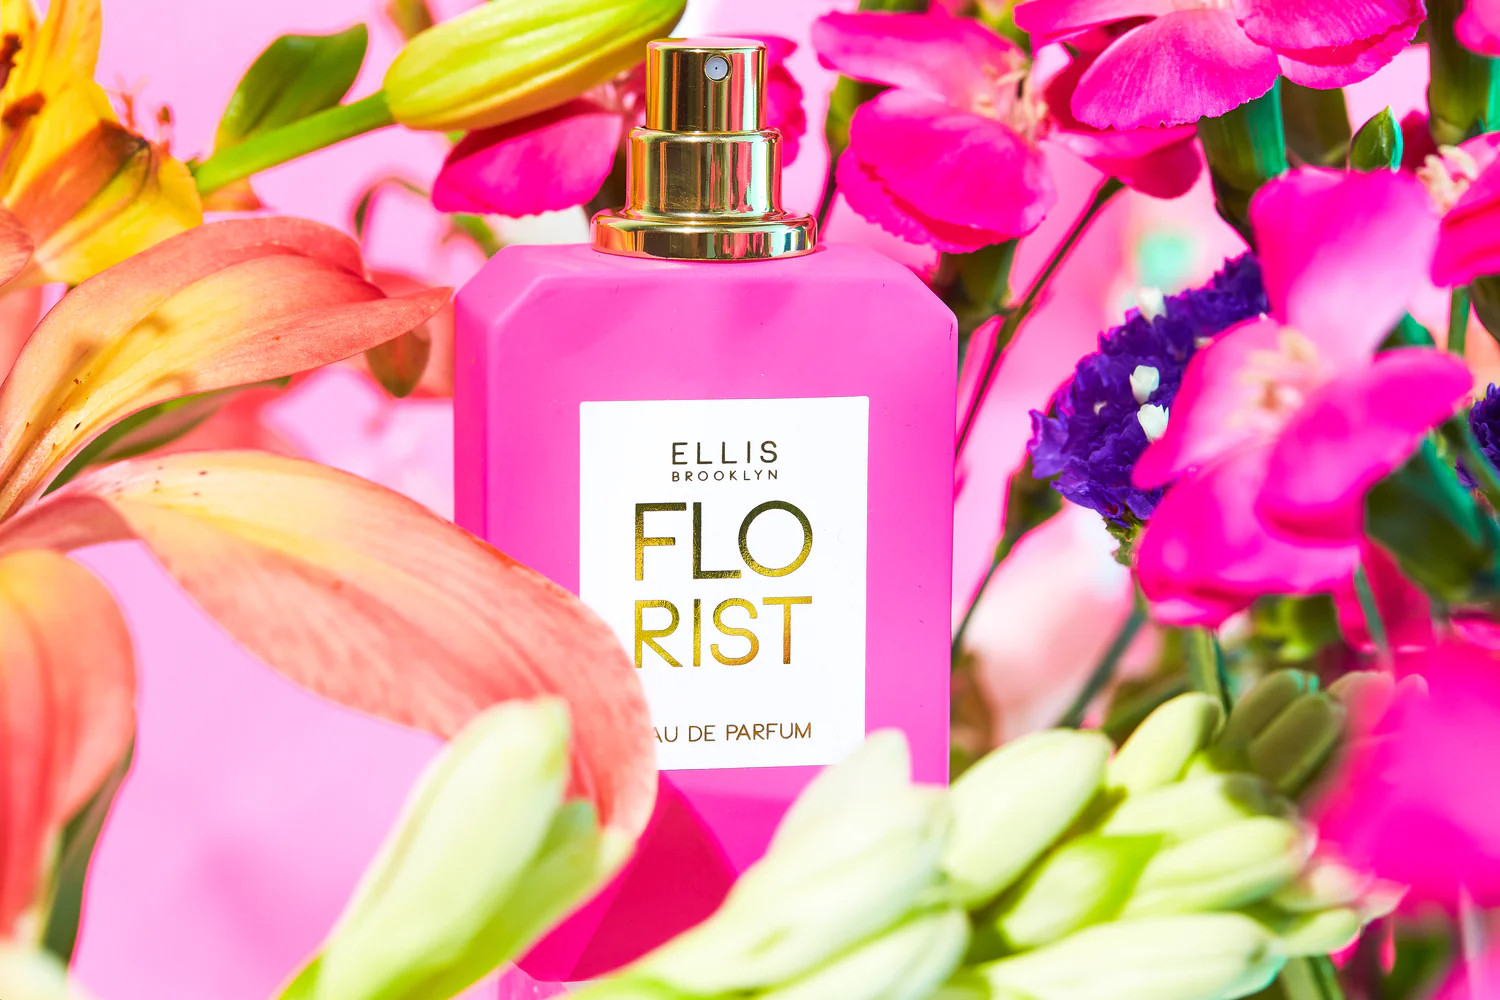 Miss Dior's new EdP takes a couture flourish